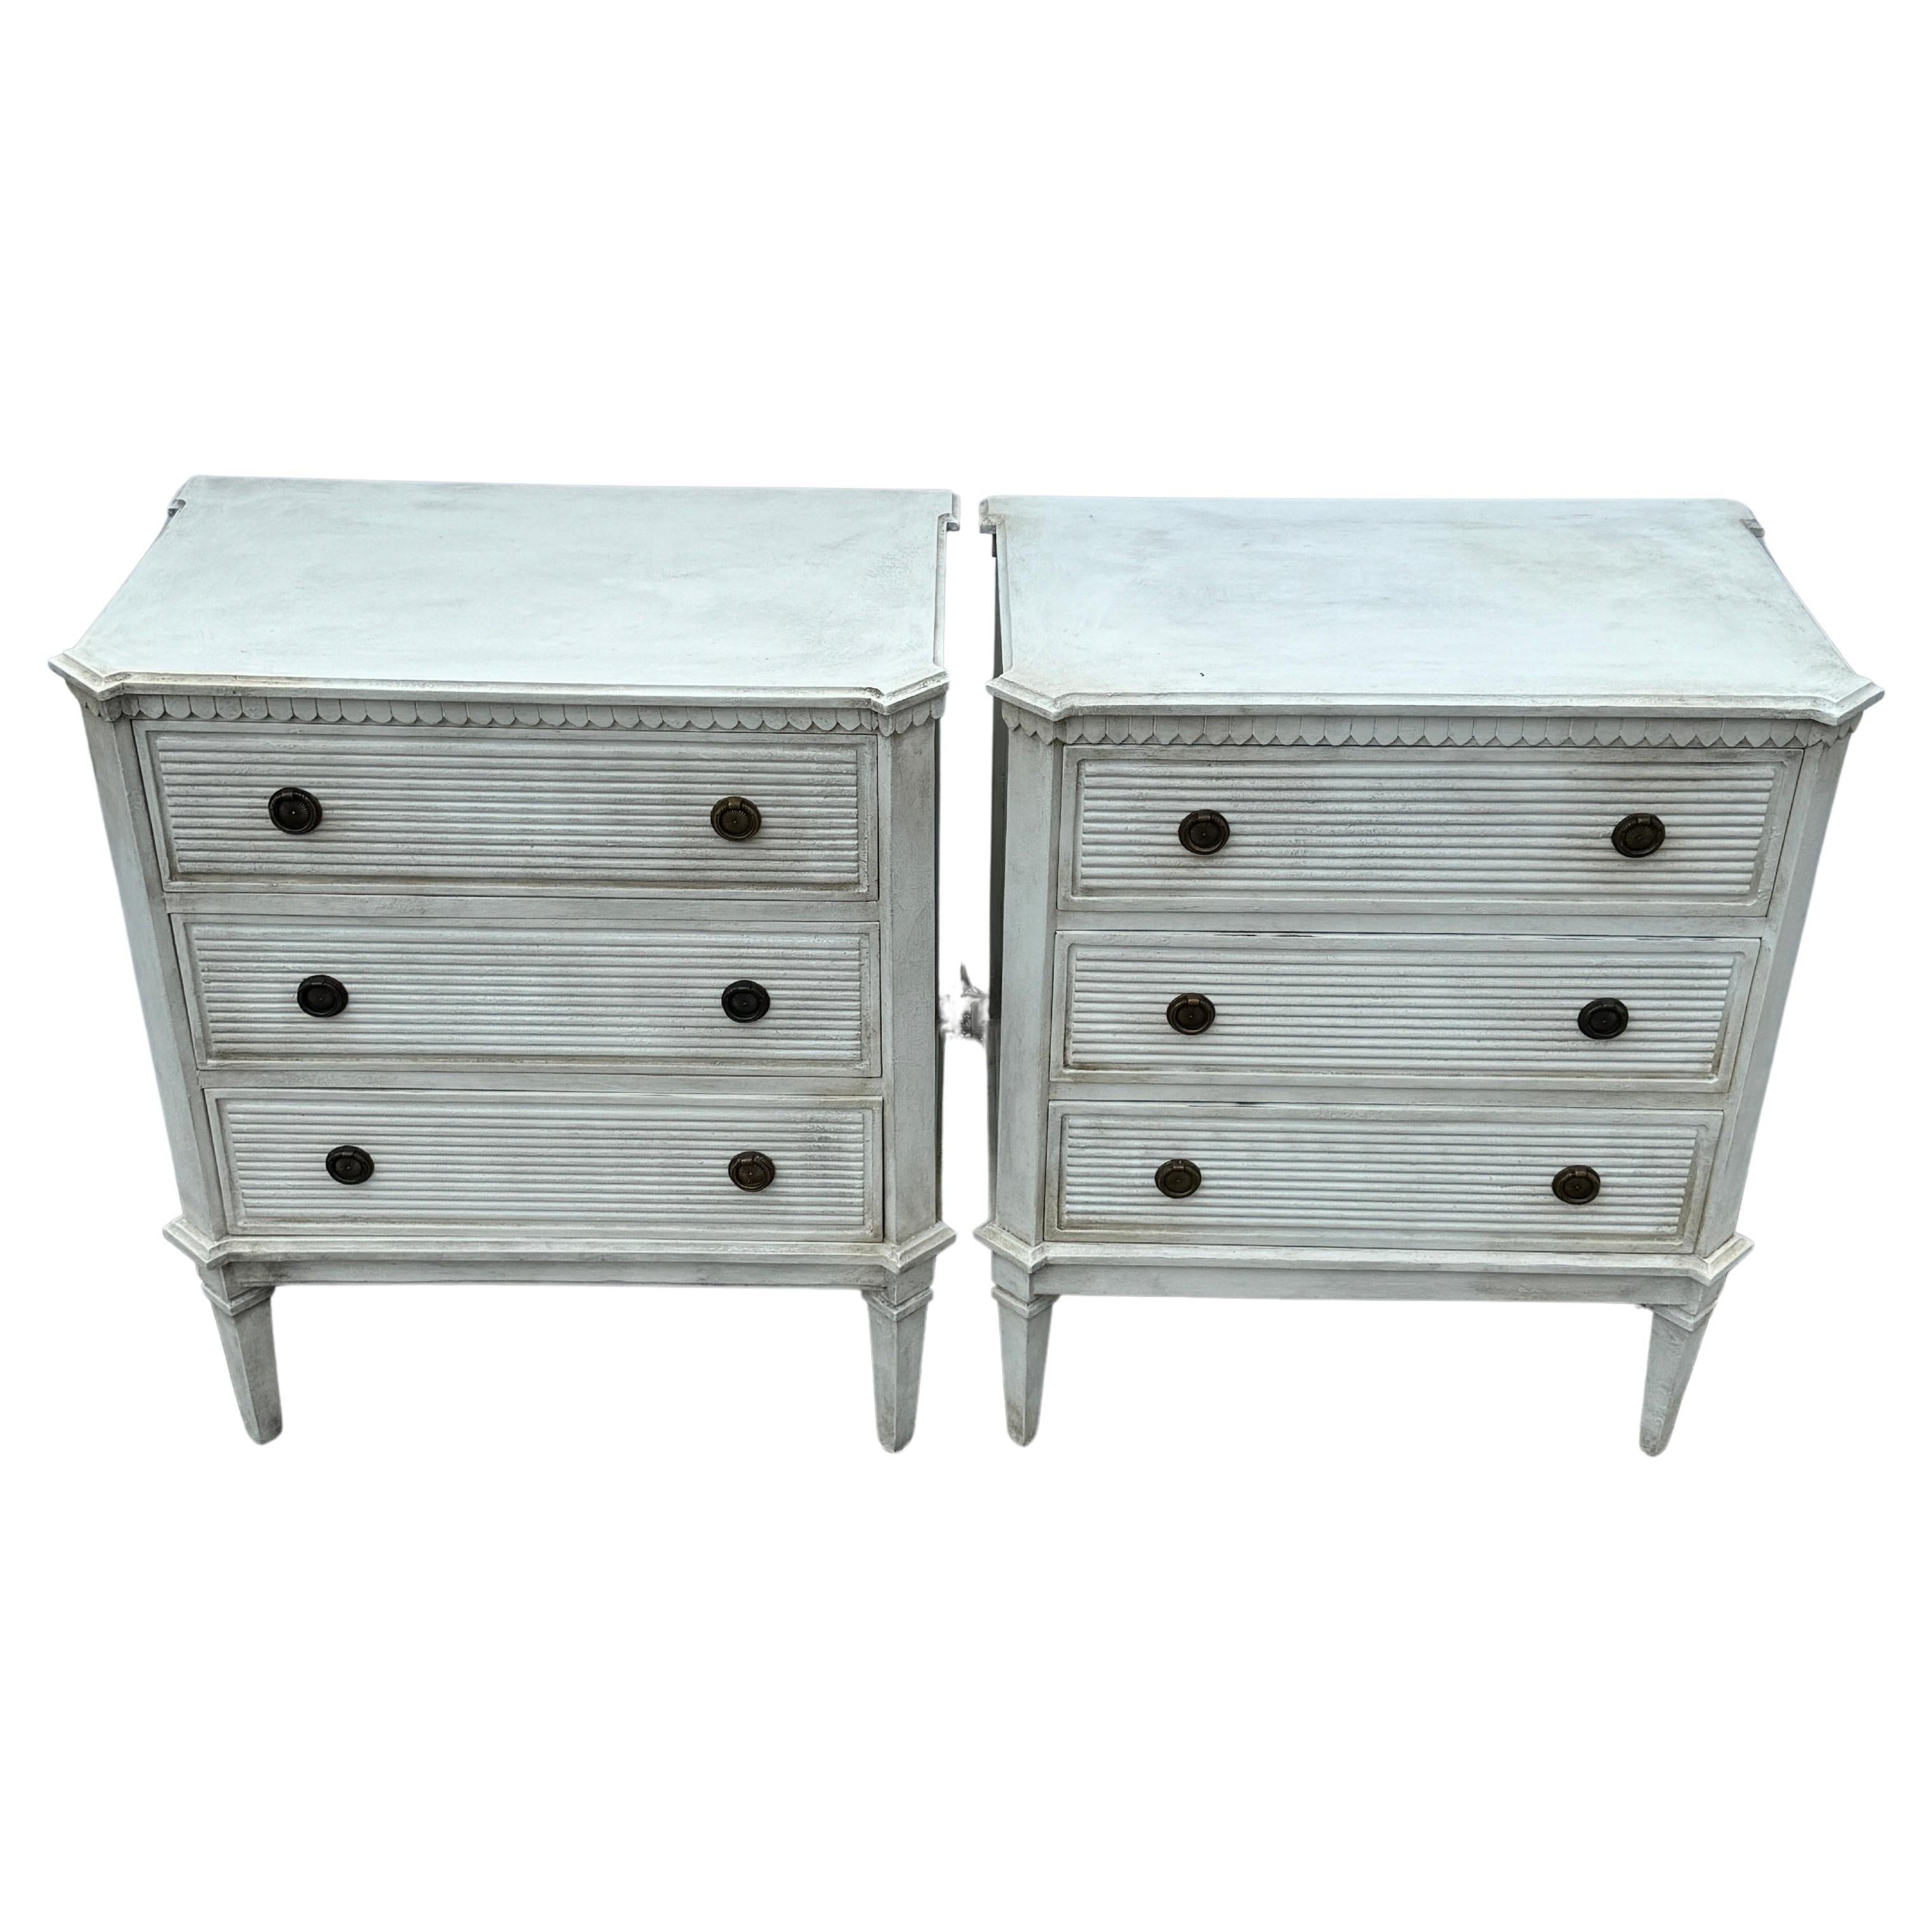 White Painted Gustavian Style Chest of Drawers, A Pair  

Pair of white/greyish hand painted Gustavian style chest of drawers constructed from solid wood with a hand-applied distressed finish with brass ring hardware. These classic Swedish style two